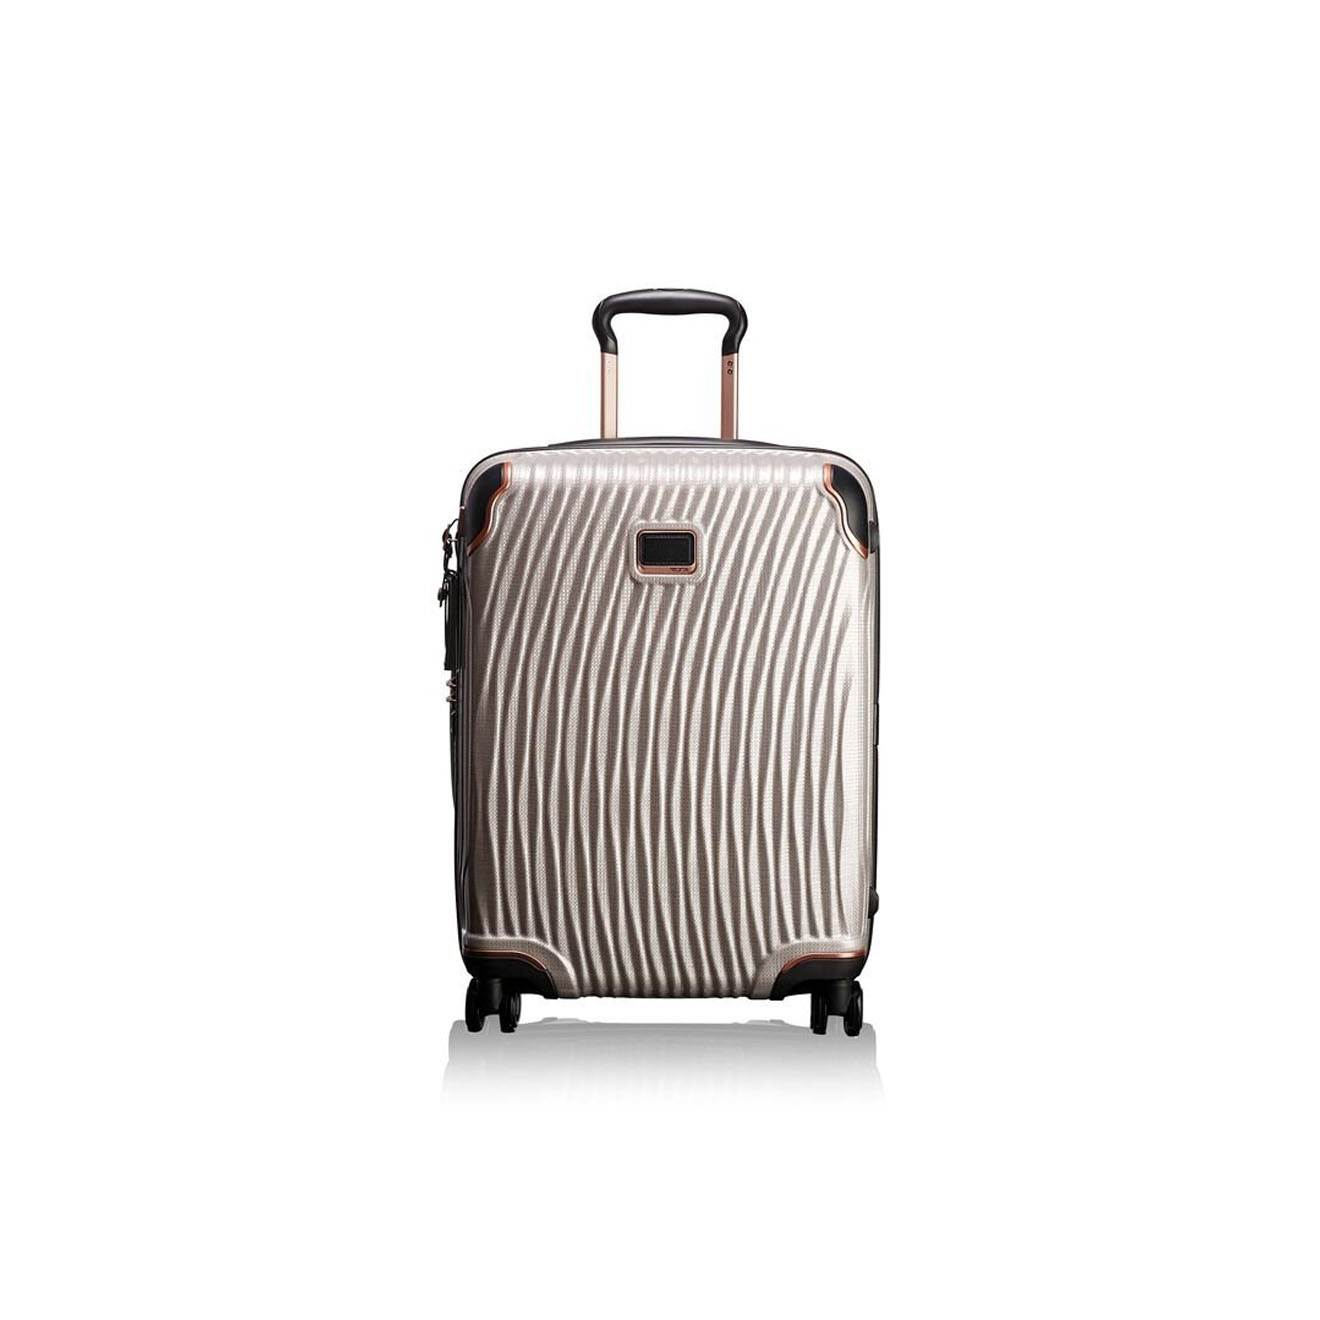 Tumi- 30% extra discount on selected items